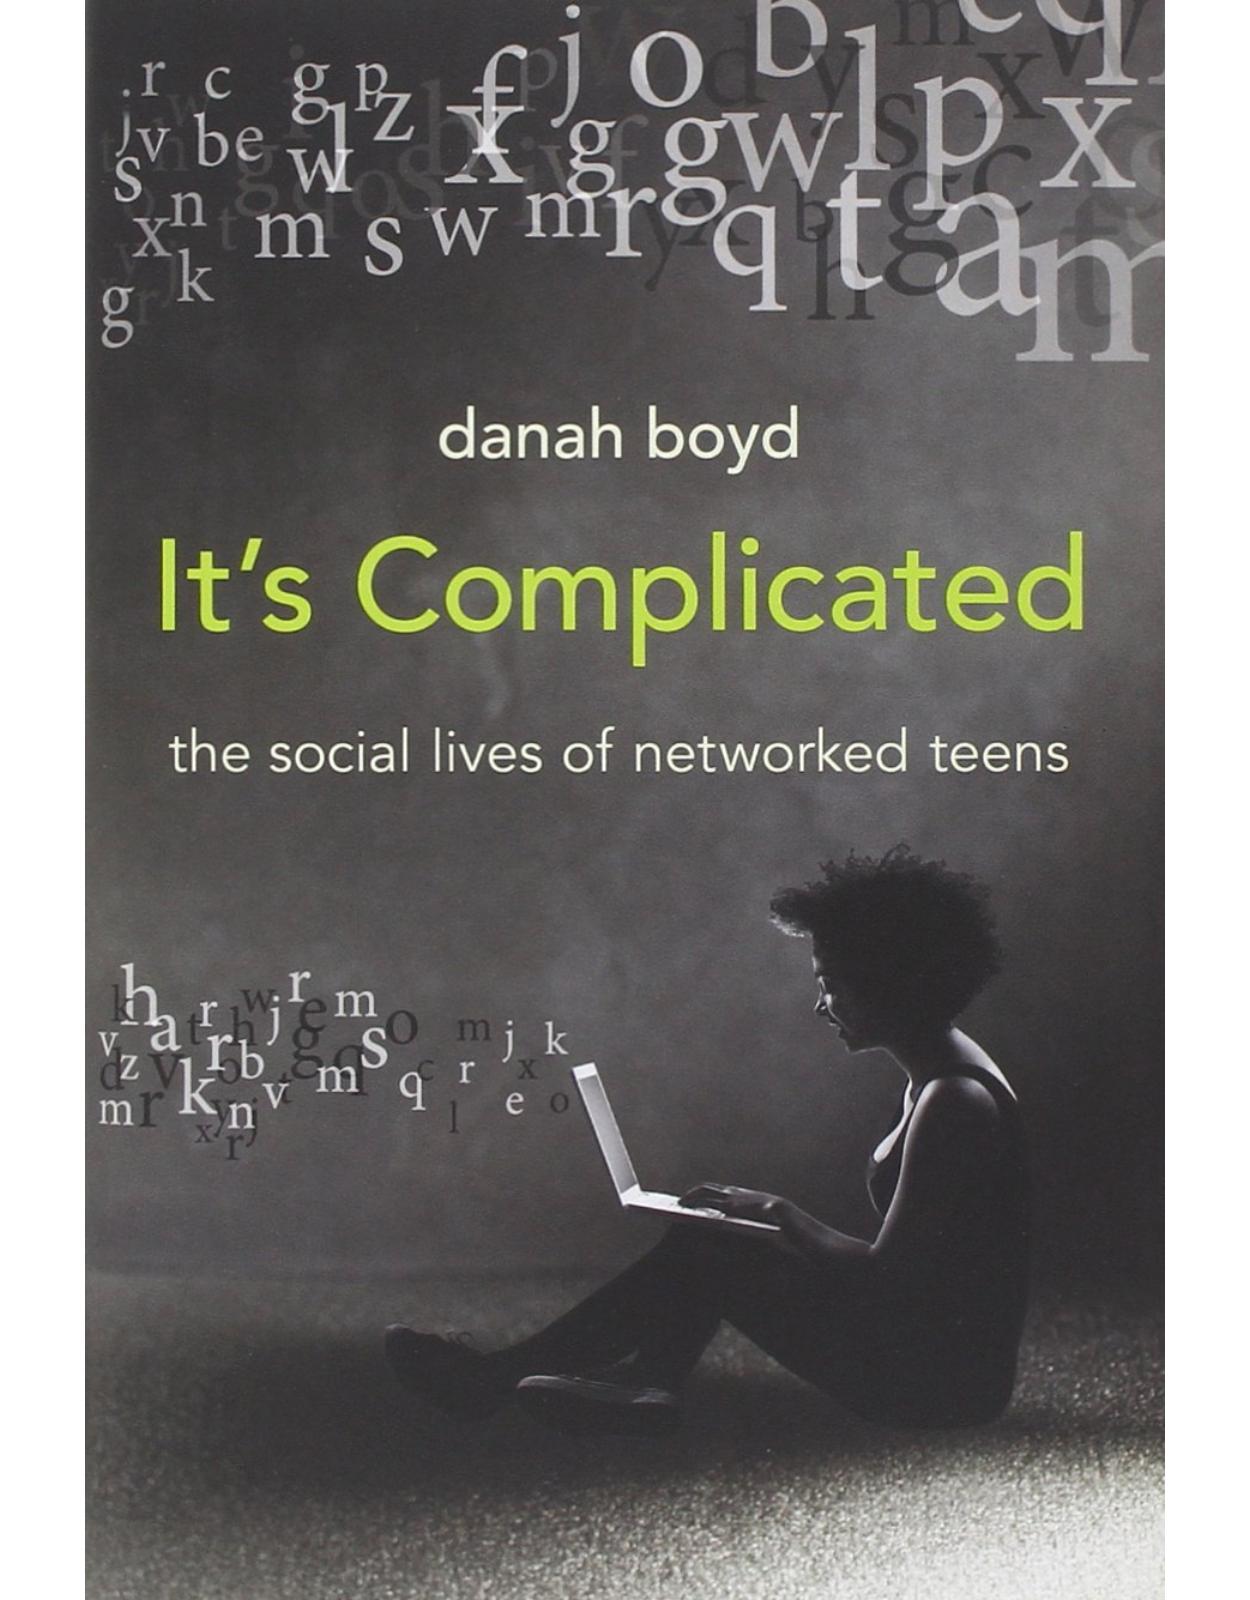 It's Complicated. The Social Lives of Networked Teens